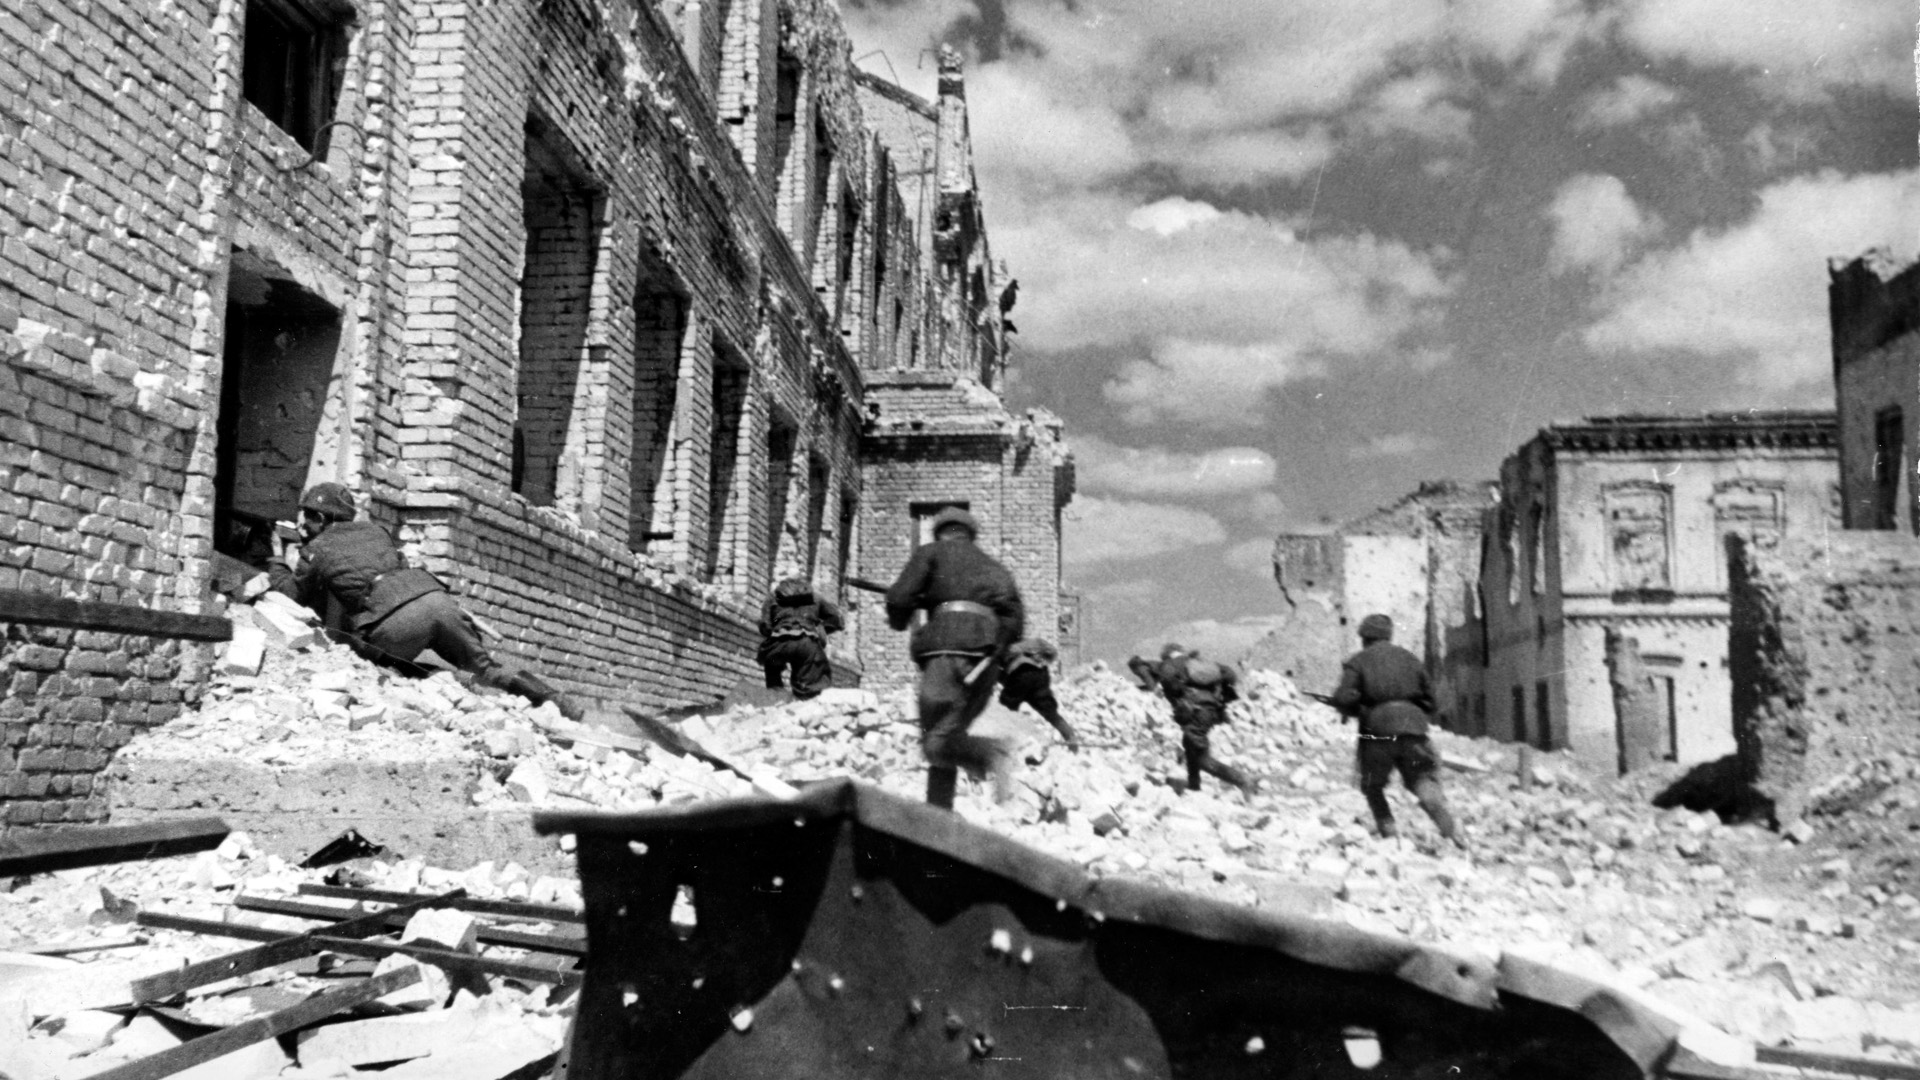 Soviet soldiers storm the ruins of School # 6 in a photpgraph by Russian newspaper photographer Georgy Zelma.